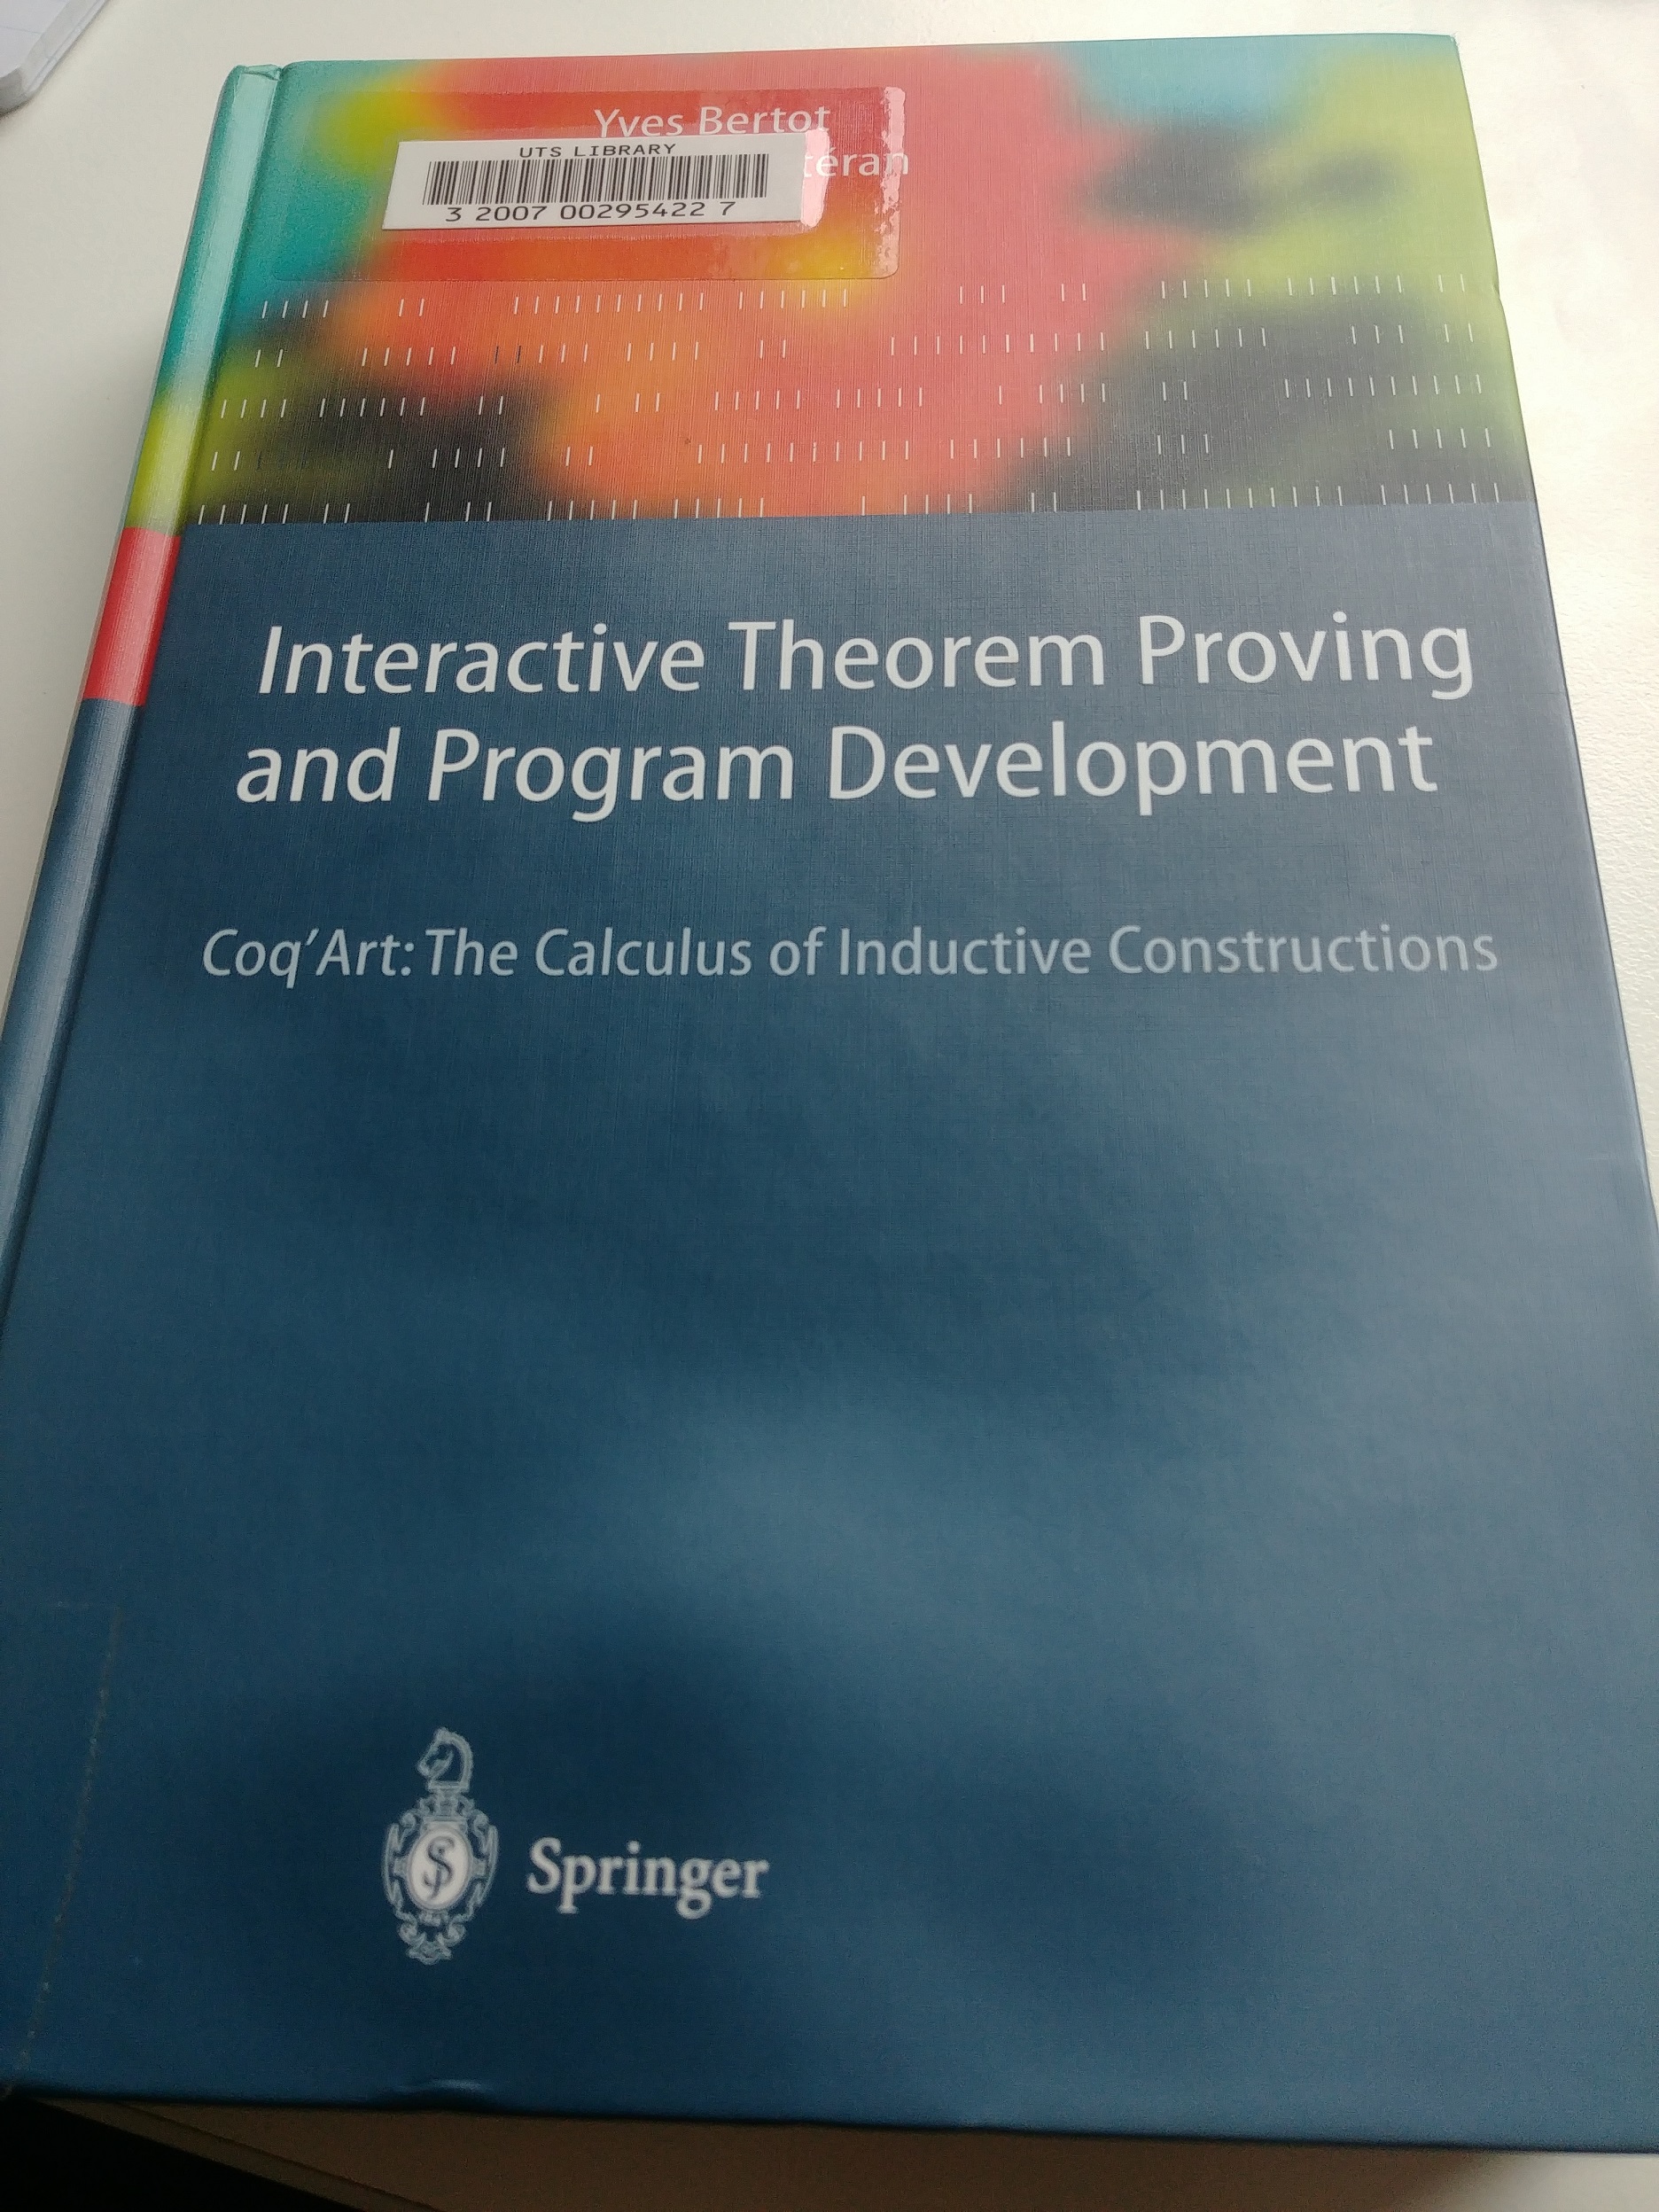 Interactive Theorem Proving and Program Development, subtitled Coq'Art: The Calculus of Inductive Constructions, by Yves Bertot and Pierre Castéran